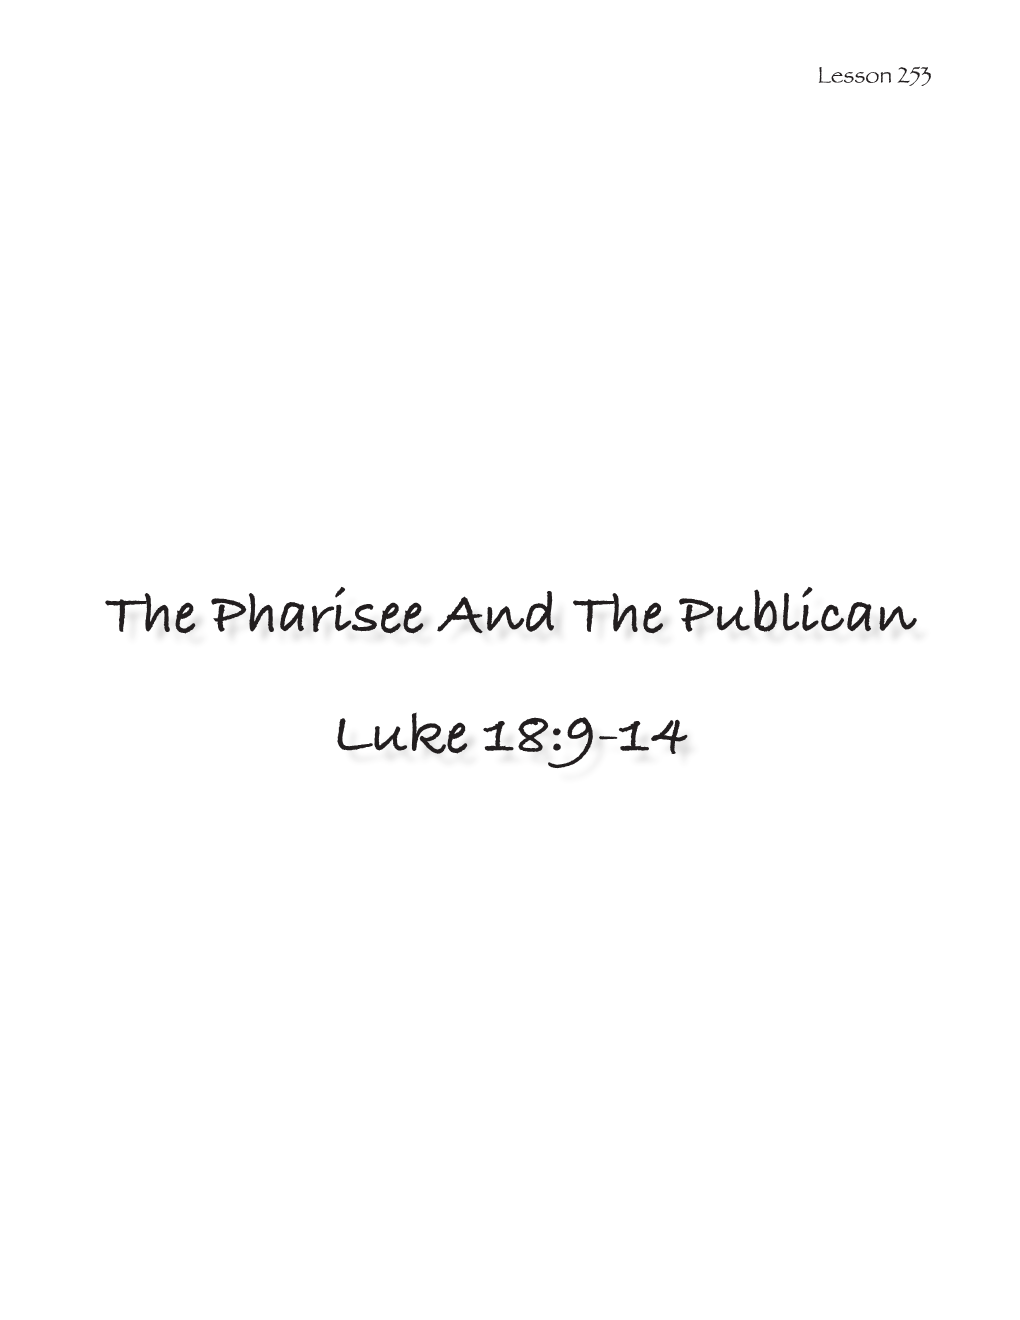 The Pharisee and the Publican Luke 18:9-14